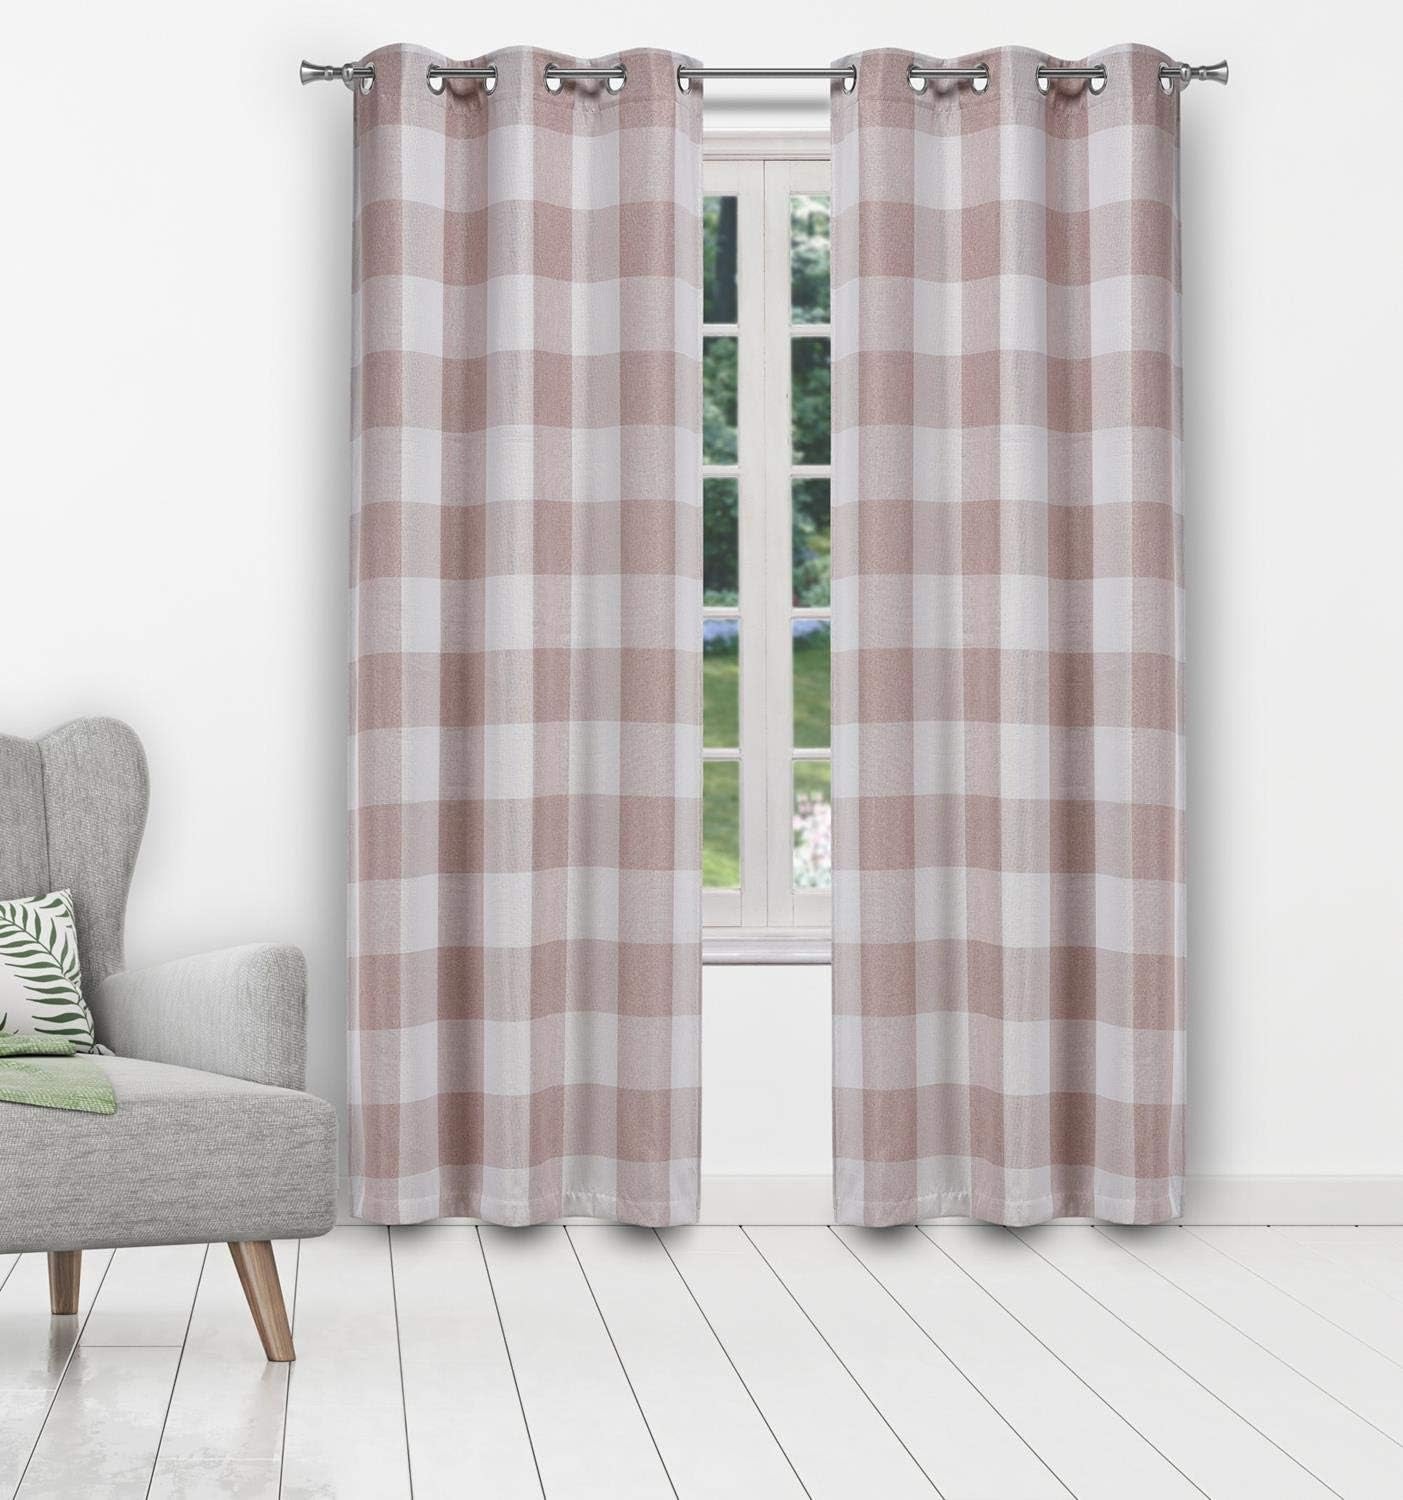 Blackout 365 Aaron Checkered Set Buffalo Plaid Blackout Bedroom-Insulated and Energy Efficient Rod Pocket Window Curtains for Living Room, 37 in X 84 in (W X L), Grey  Blackout 365 Blush 37 In X 84 In (W X L) 